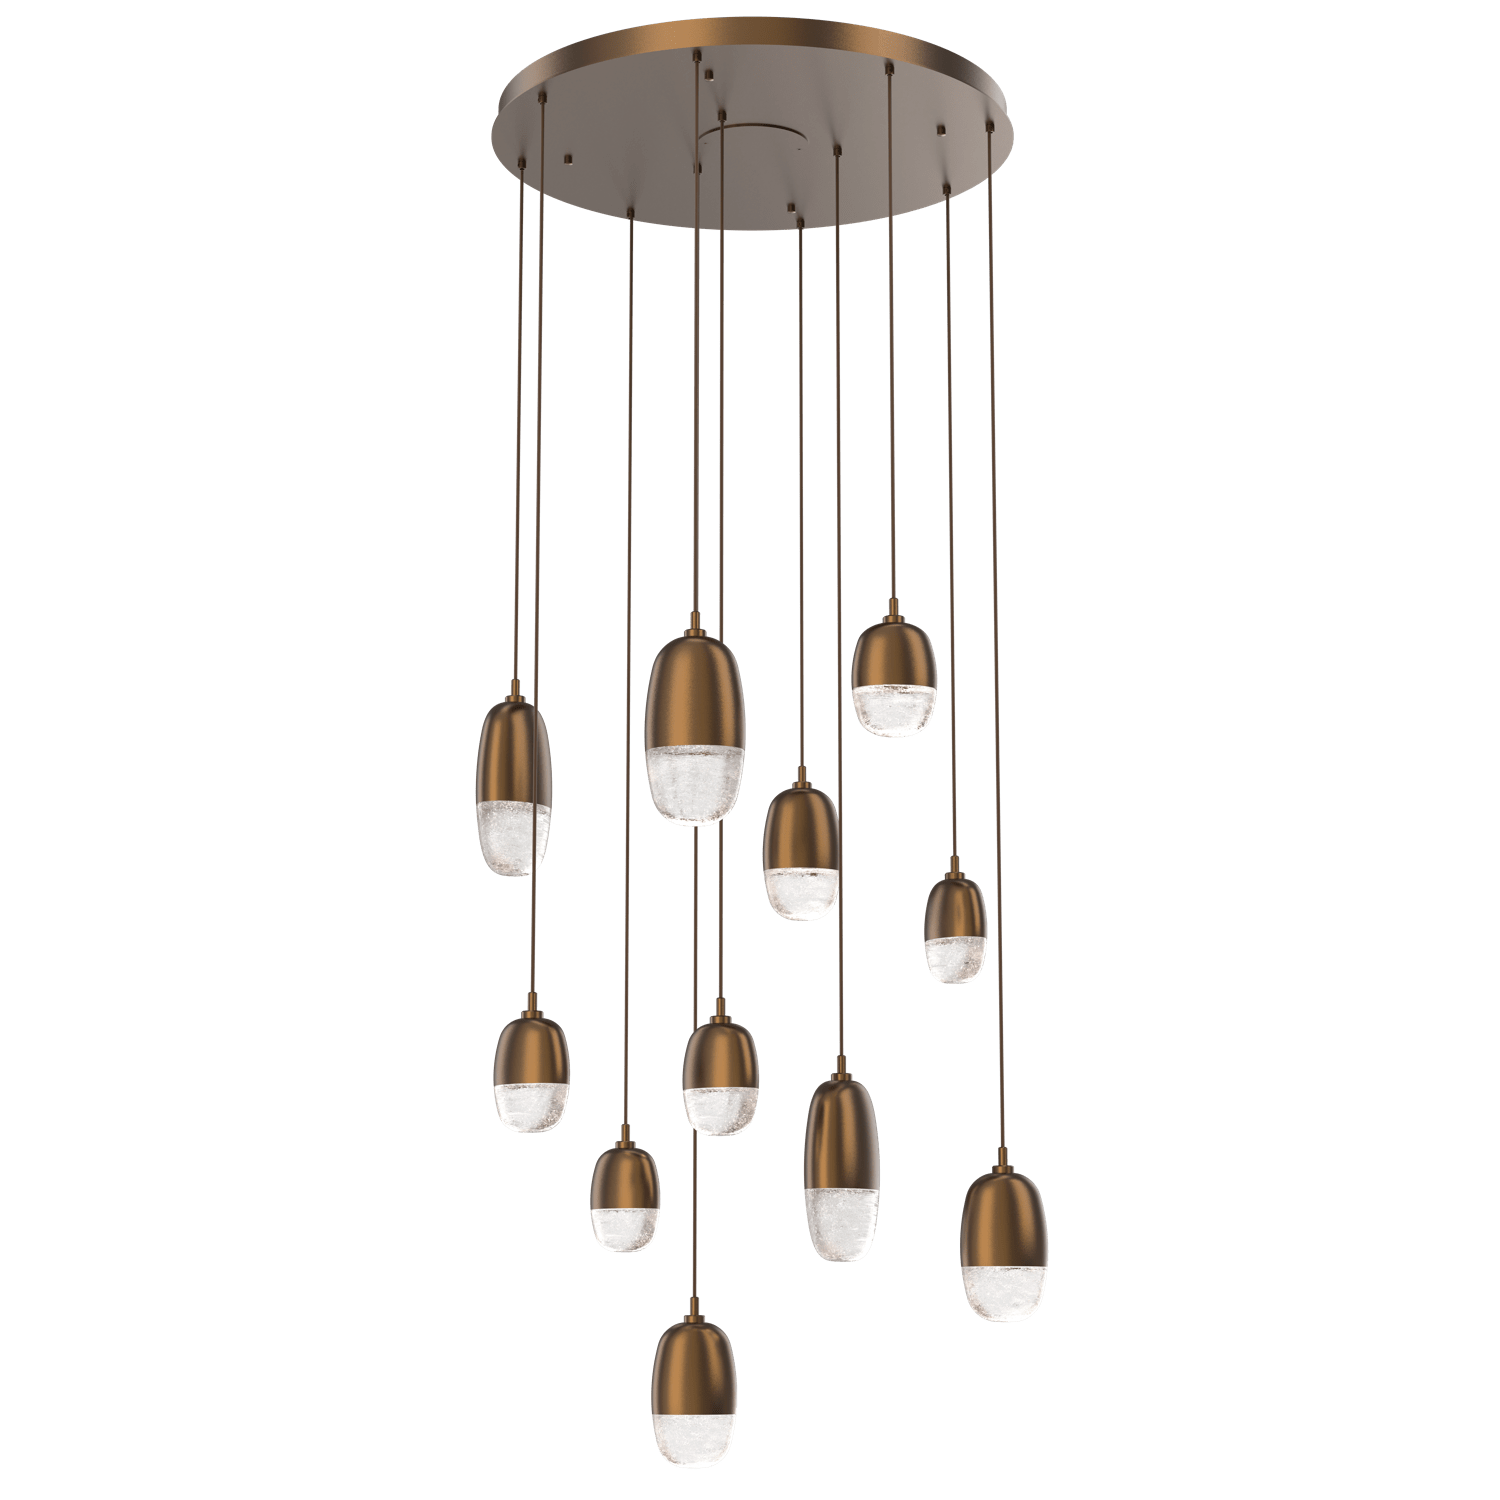 CHB0079-11-FB-Hammerton-Studio-Pebble-11-light-round-pendant-chandelier-with-flat-bronze-finish-and-clear-cast-glass-shades-and-LED-lamping